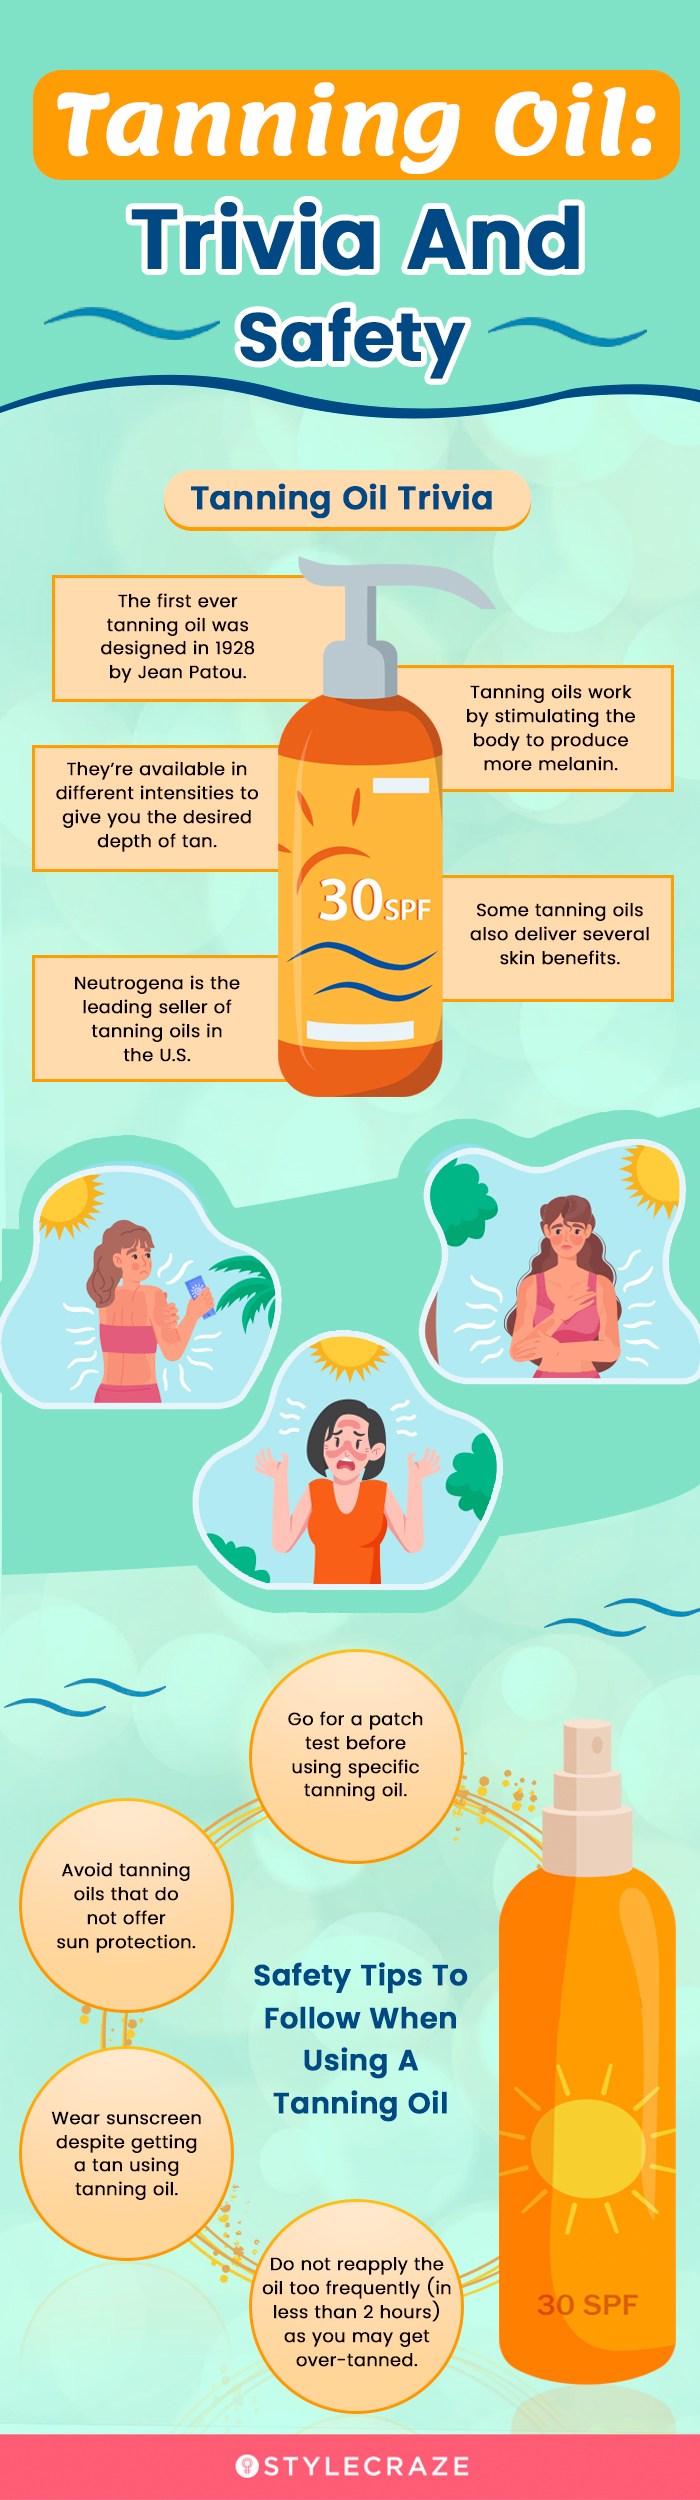 Tanning Oil: Trivia And Safety Tips (infographic)